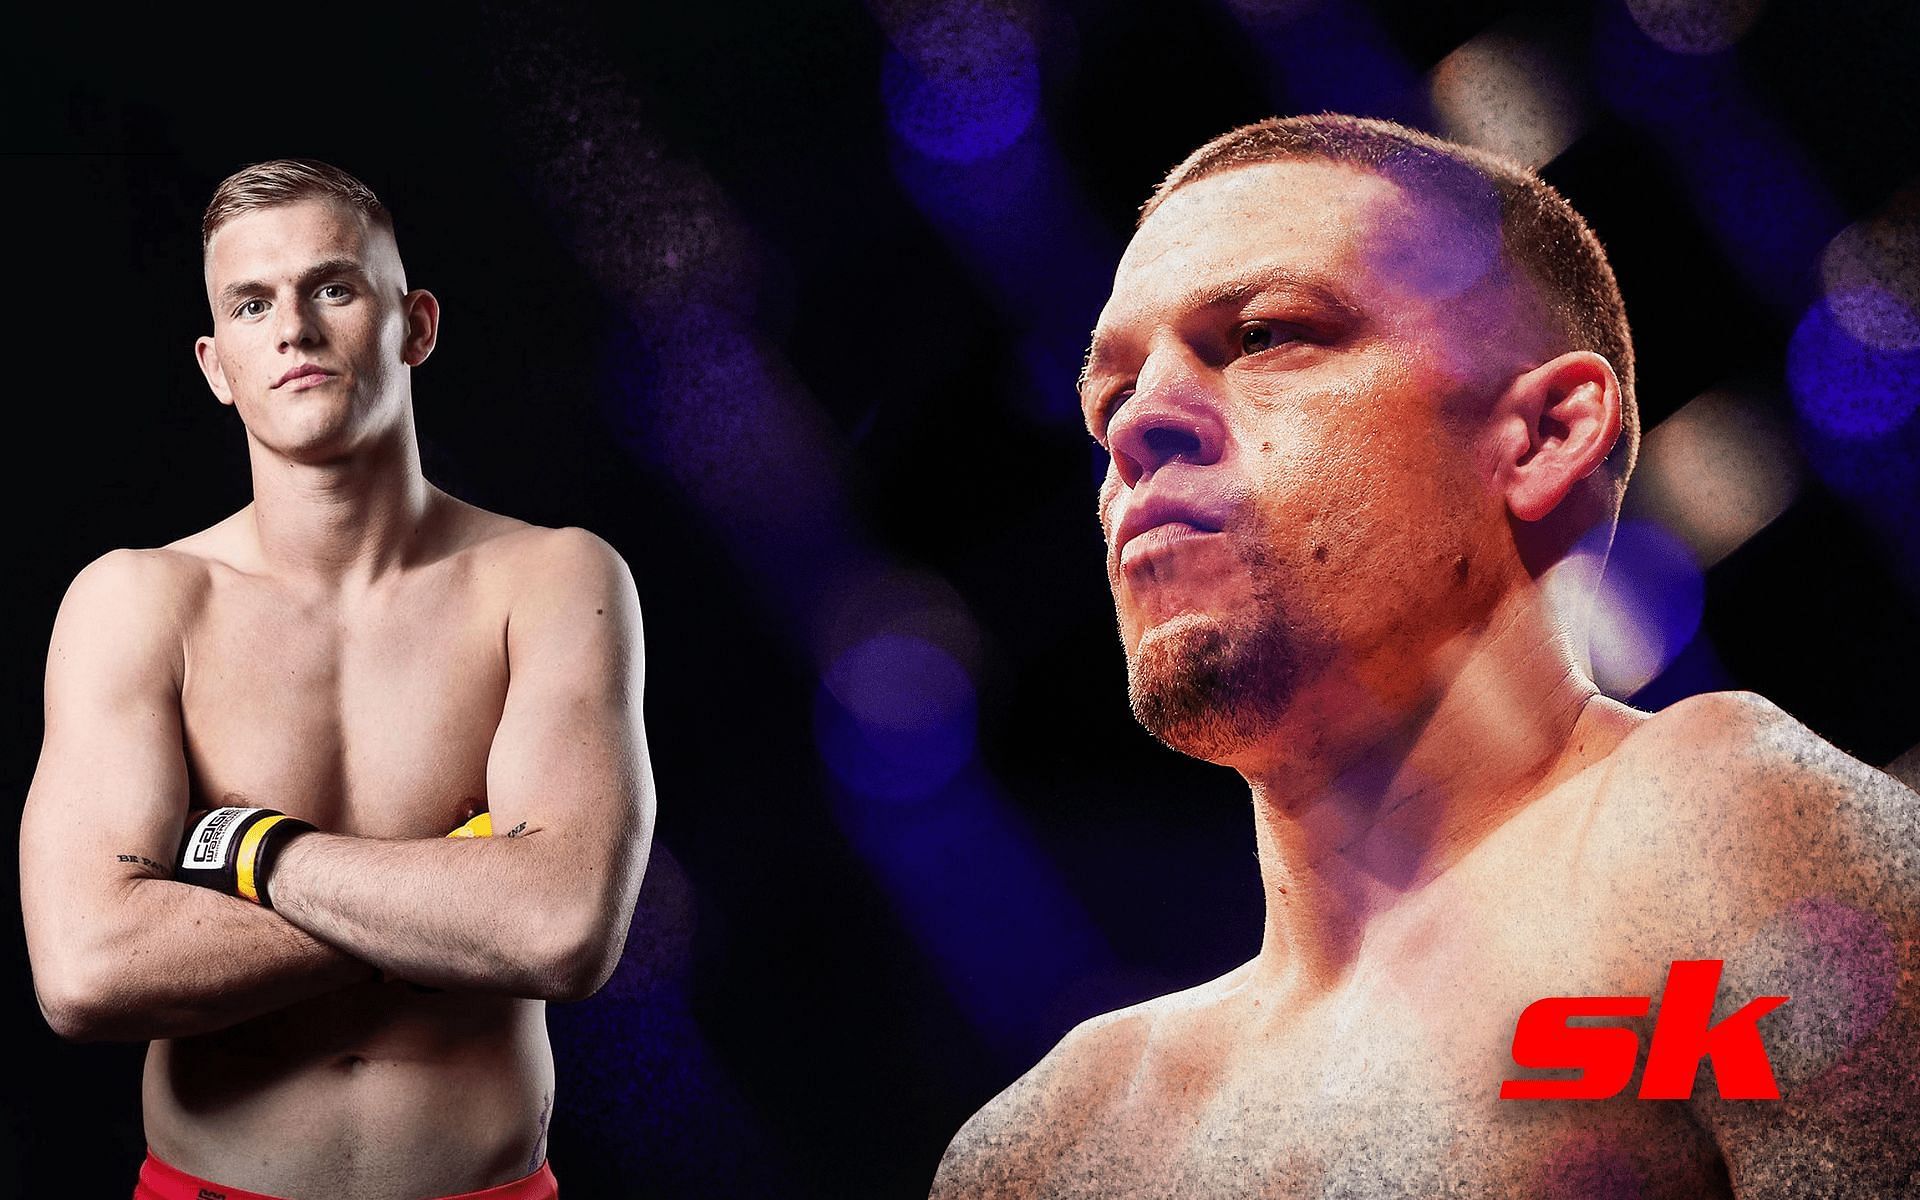 Ian Garry (left) named Nate Diaz (right) as his dream matchup [Left image via @iangarry on Instagram]